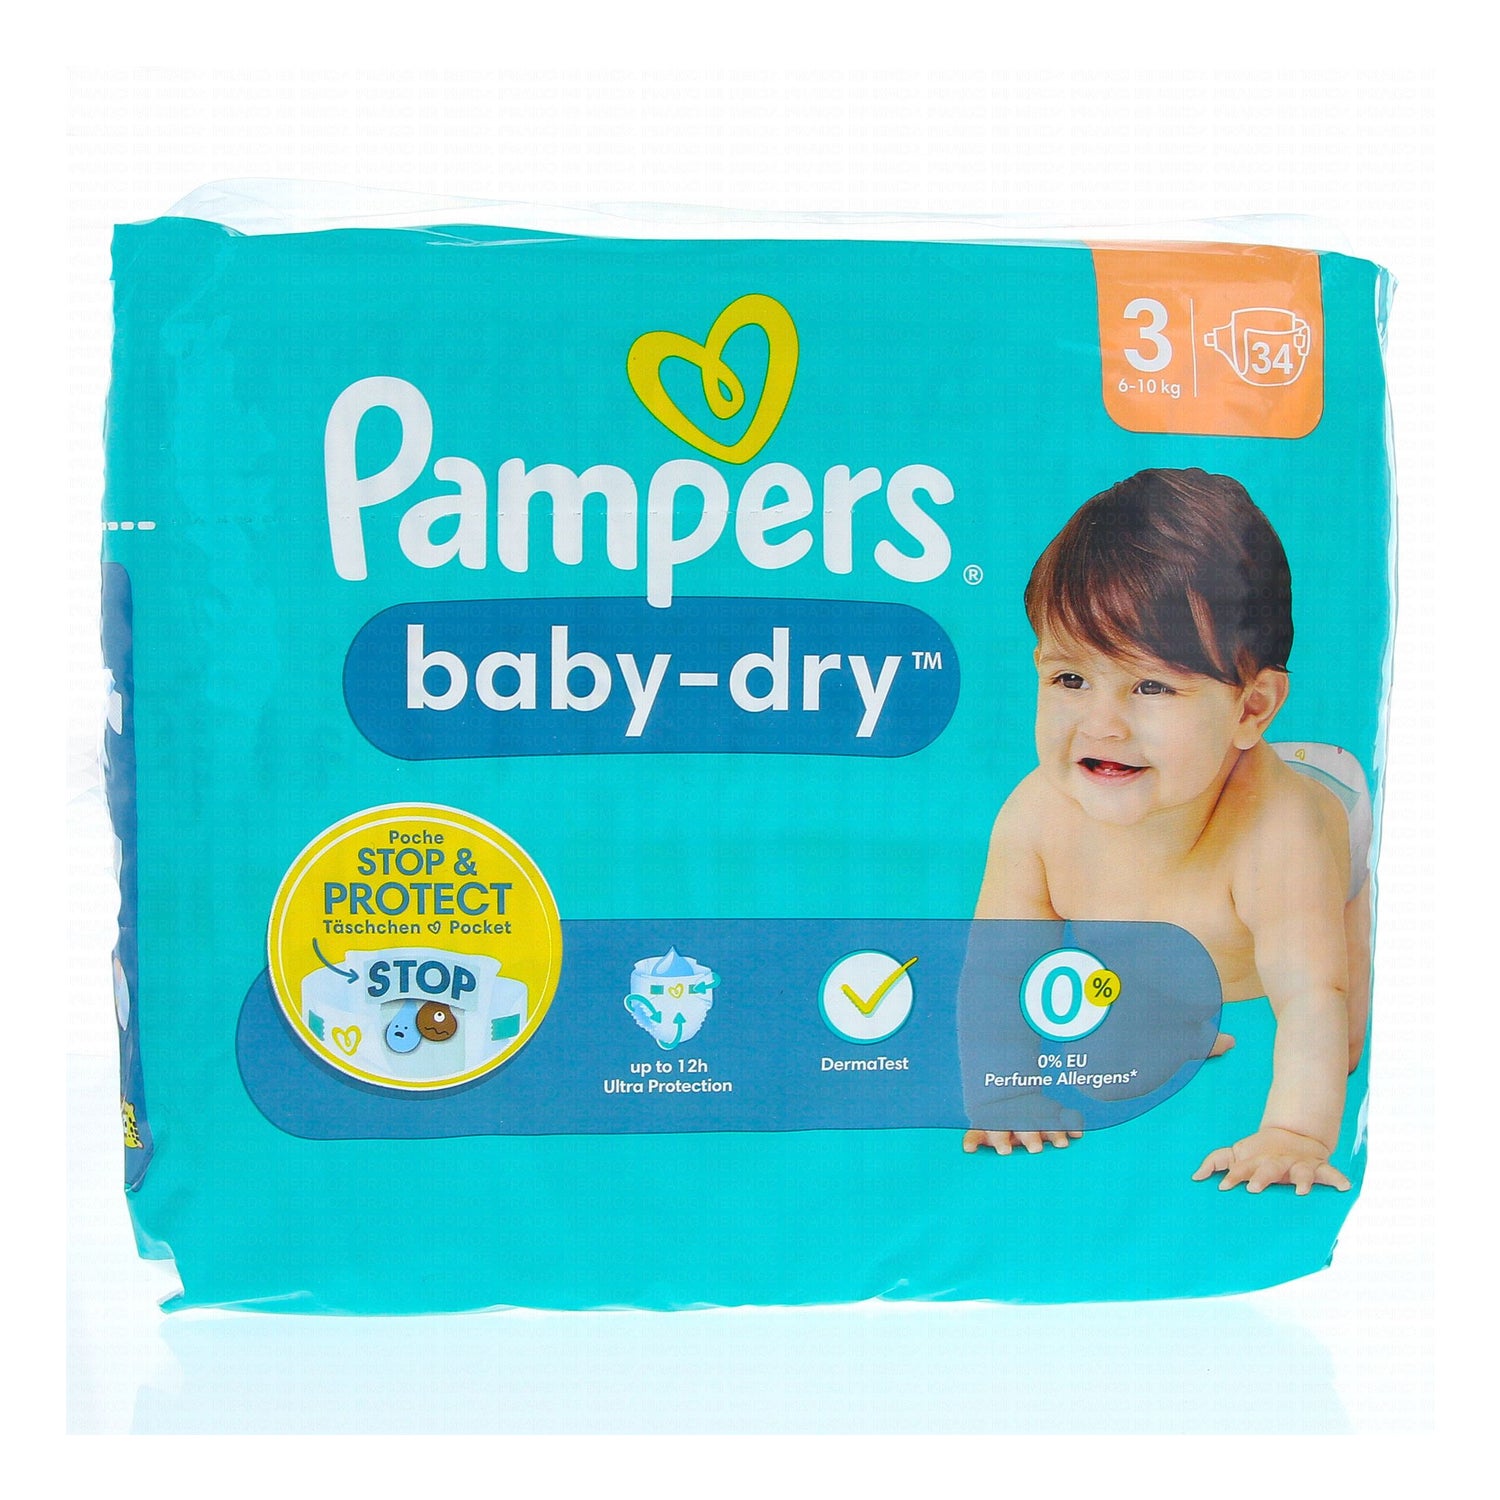 Pampers New Baby Taille 1 (2-5kg) X 22 couches